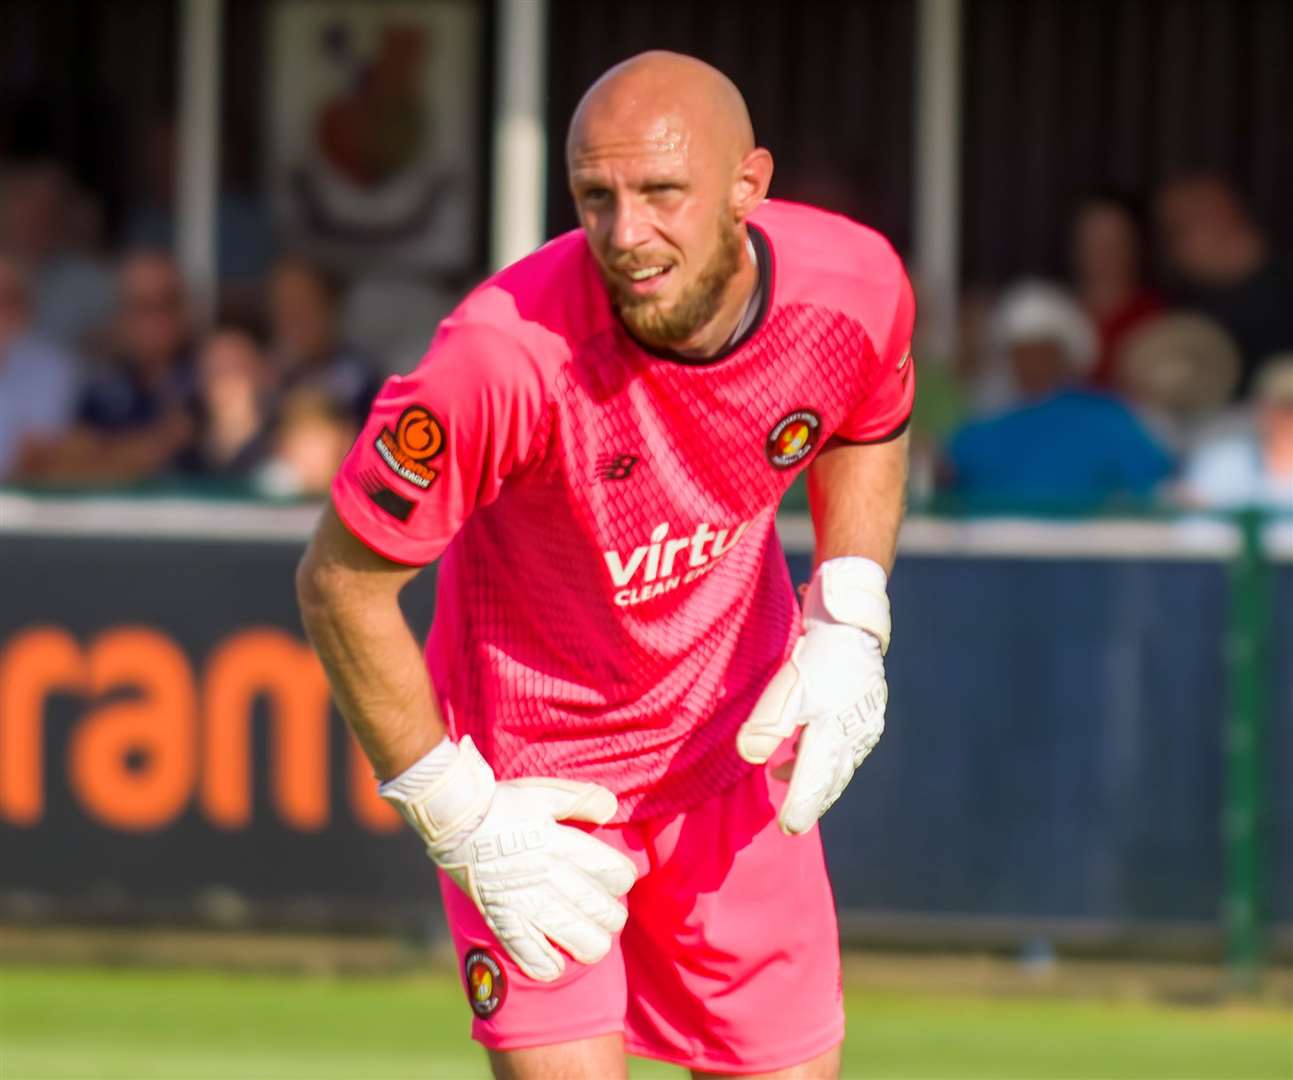 Ebbsfleet goalkeeper Mark Cousins made a super stoppage-time save to preserve a point. Picture: Ed Miller/EUFC